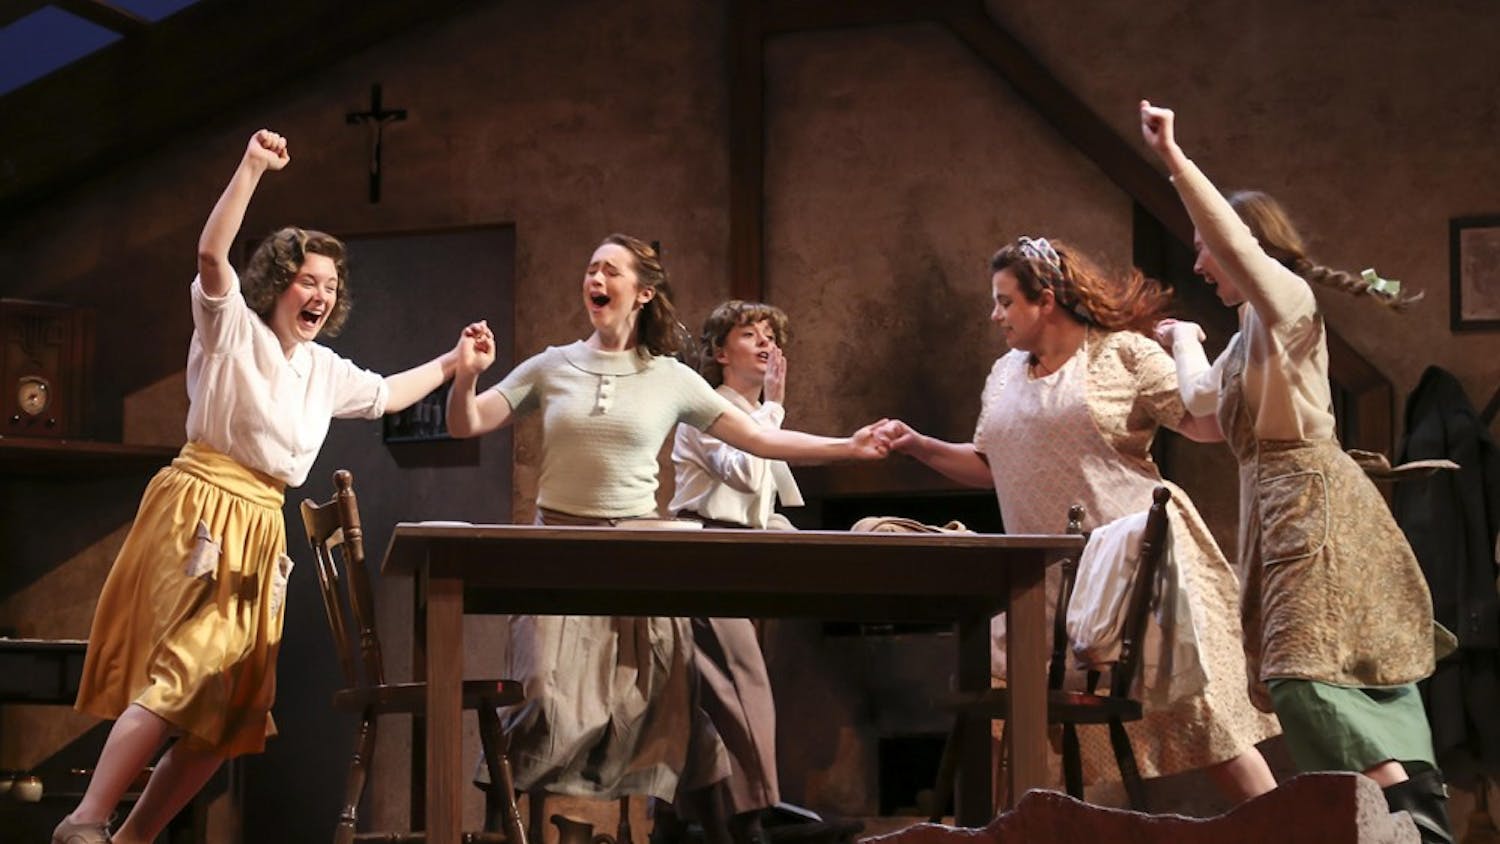 Performers dance during a scene of "Dancing at&nbsp;Lughnasa." The show opens Friday in the&nbsp;Ruth N. Halls Theatre.